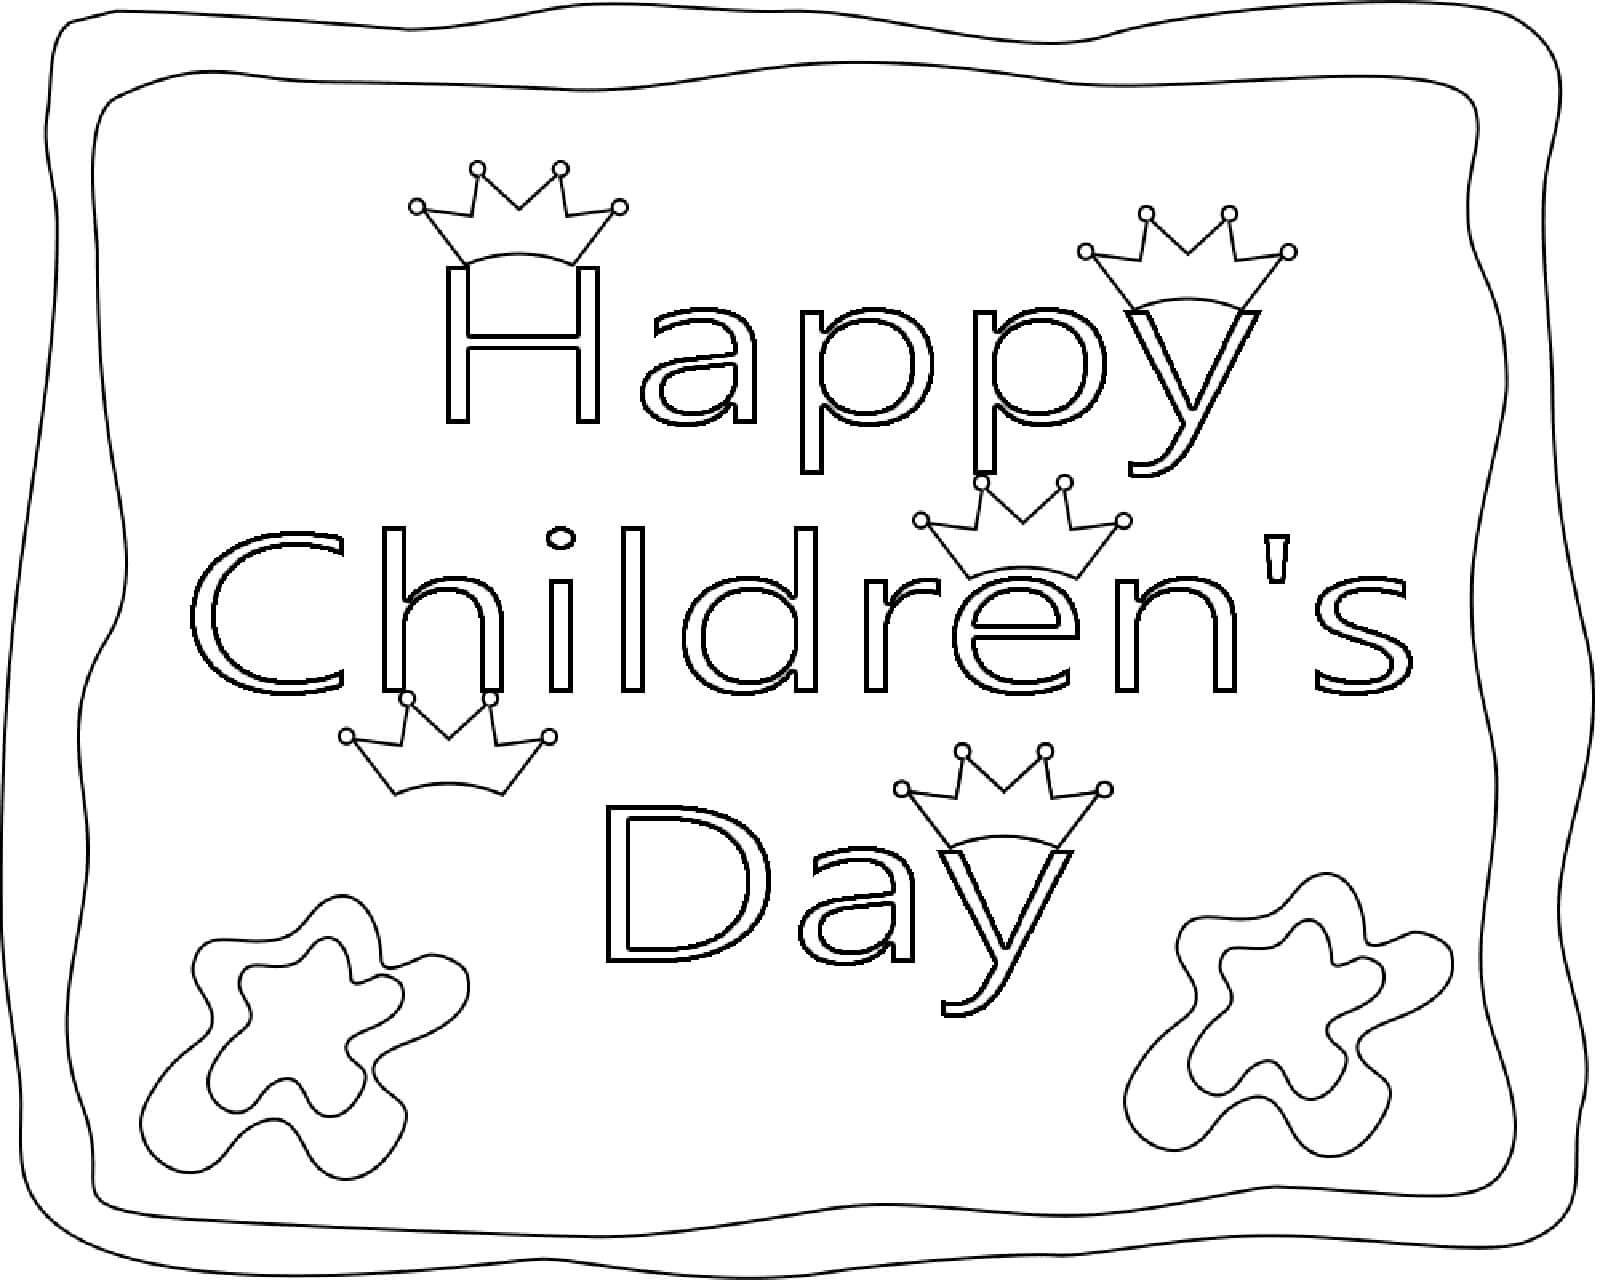 Drawing Black And White Children World Childrens Day Poster Design | PSD  Free Download - Pikbest